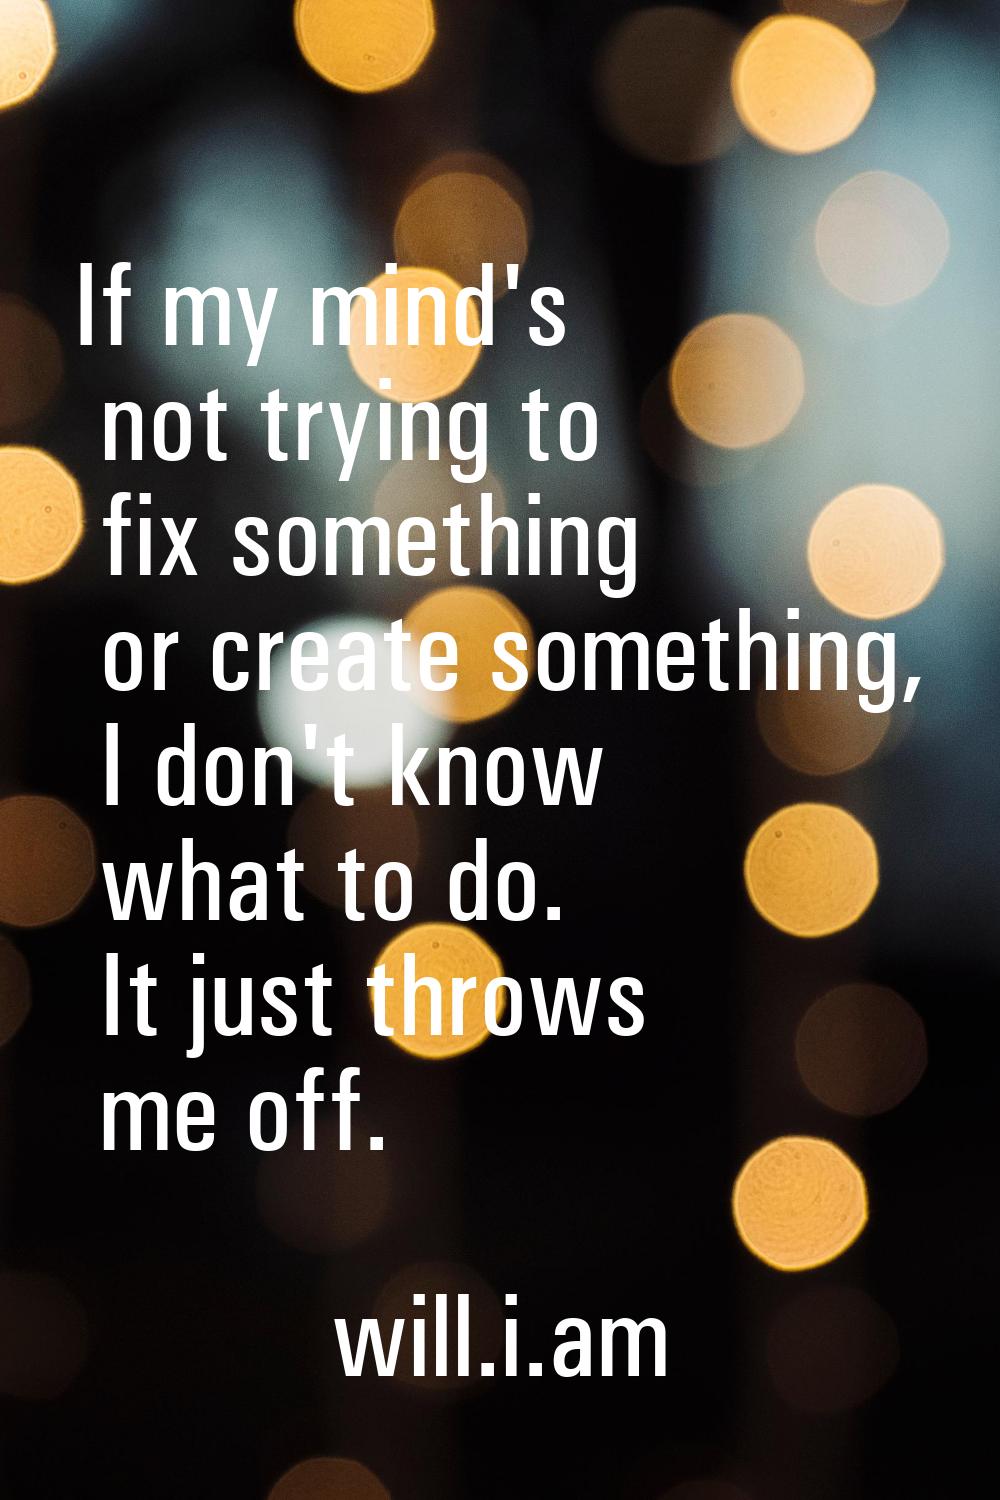 If my mind's not trying to fix something or create something, I don't know what to do. It just thro